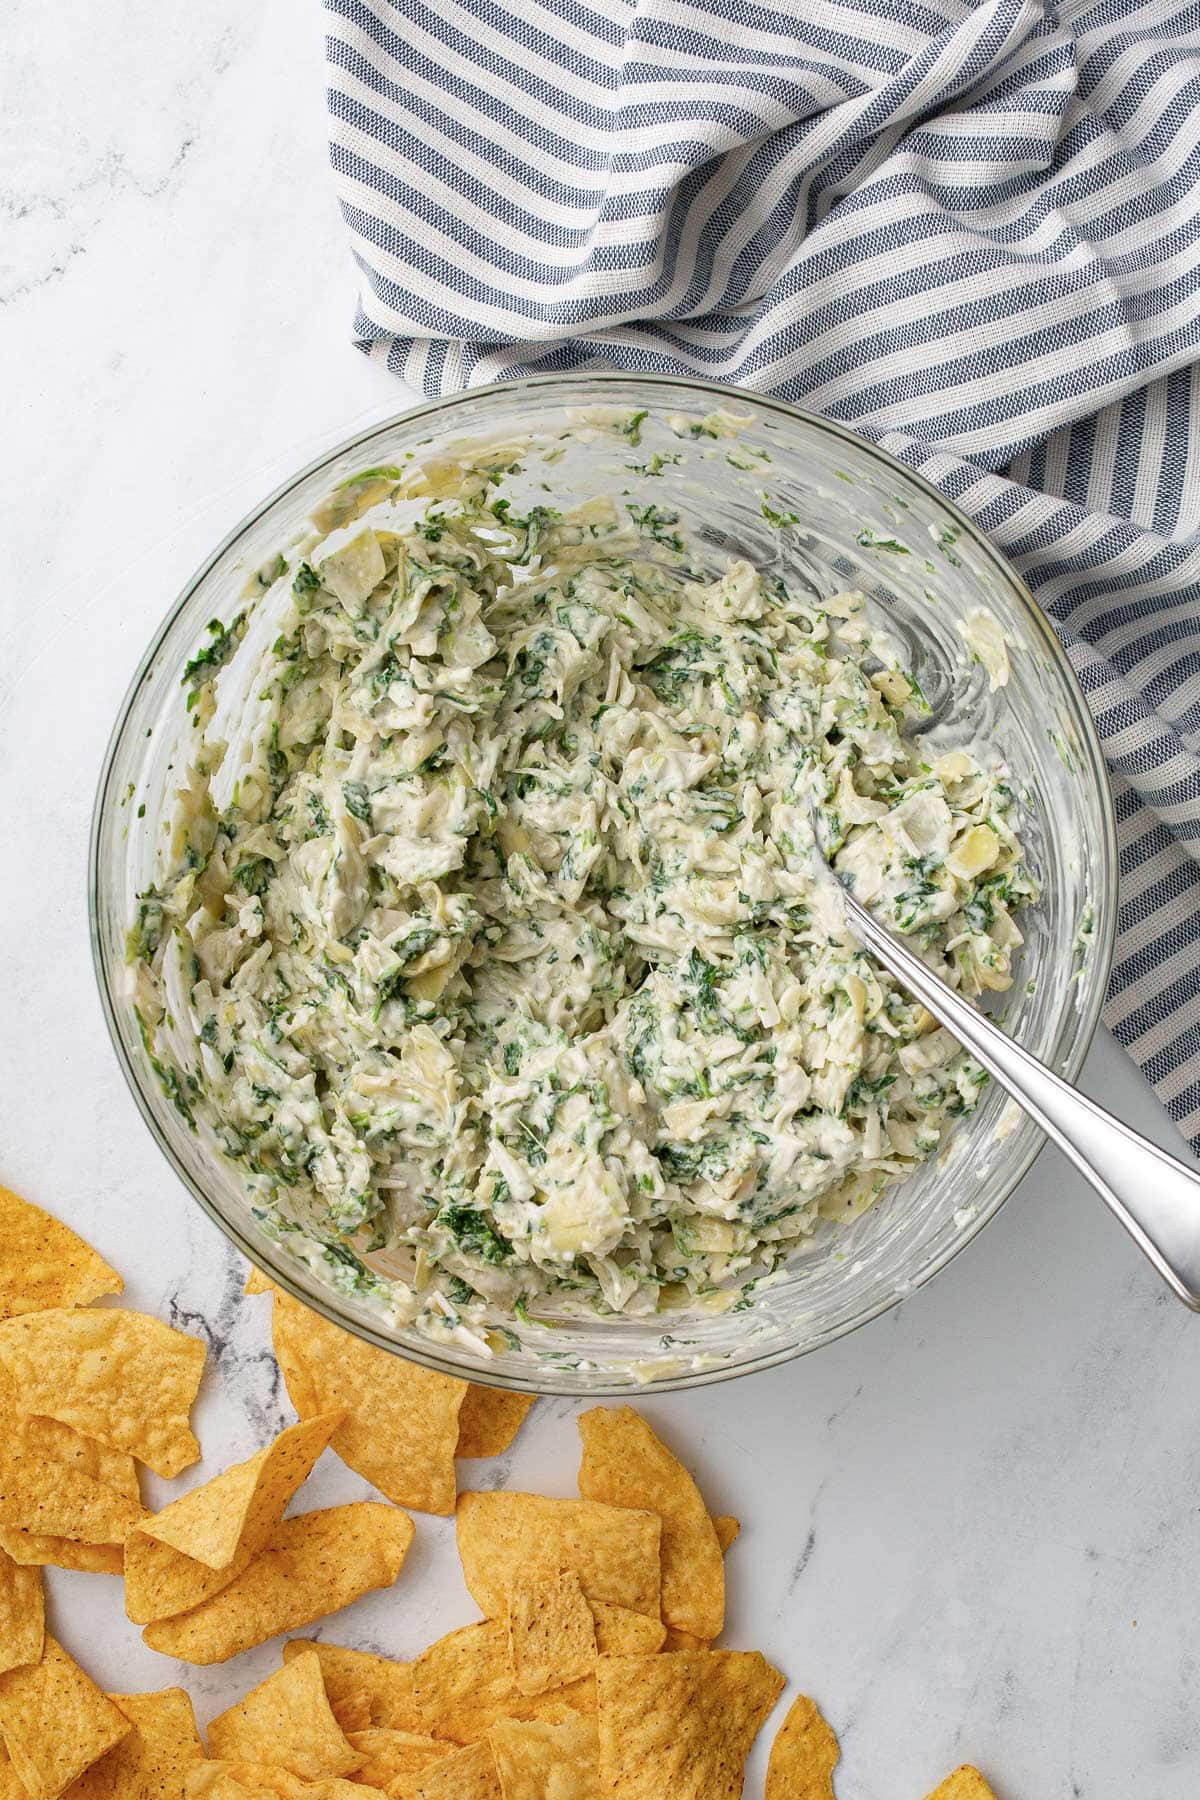 Combining the raw ingredients for spinach and artichoke dip in a glass mixing bowl.